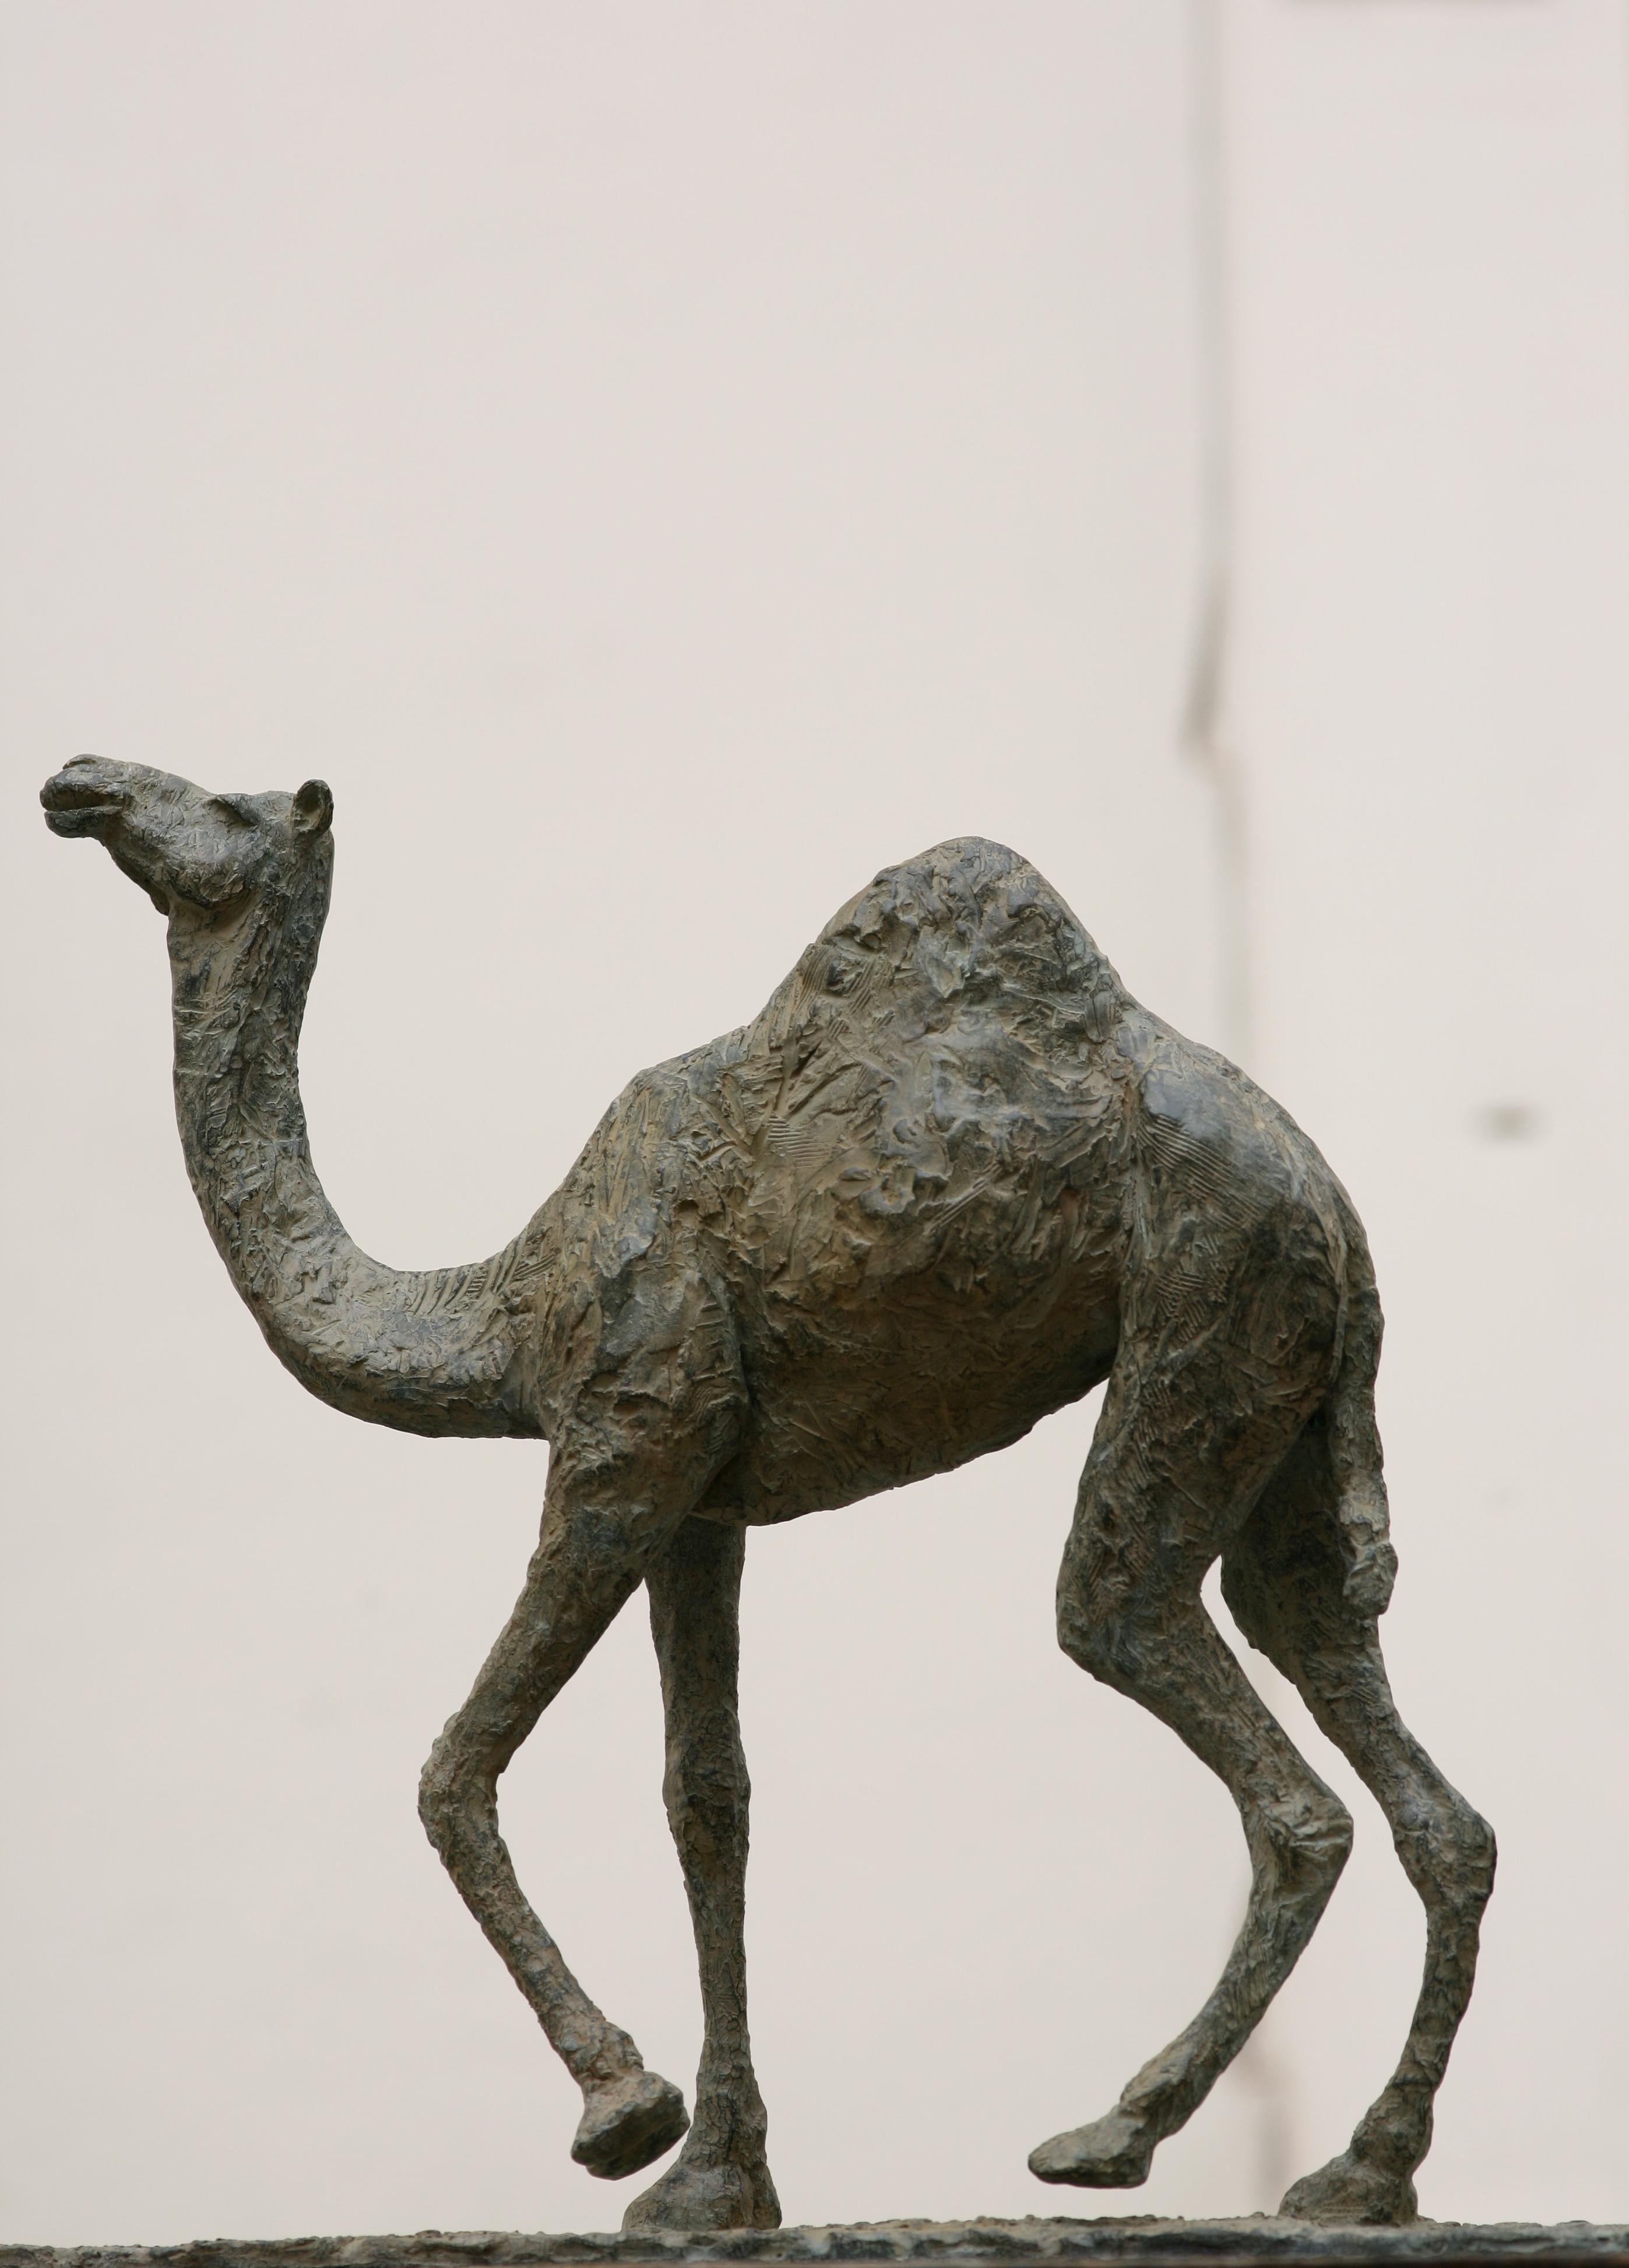 Camel is a bronze sculpture by French contemporary artist Marine de Soos, dimensions are 56 × 75 × 17 cm (22 × 29.5 × 6.7 in). 
The sculpture is signed and numbered, it is part of a limited edition of 8 editions + 4 artist’s proofs, and comes with a